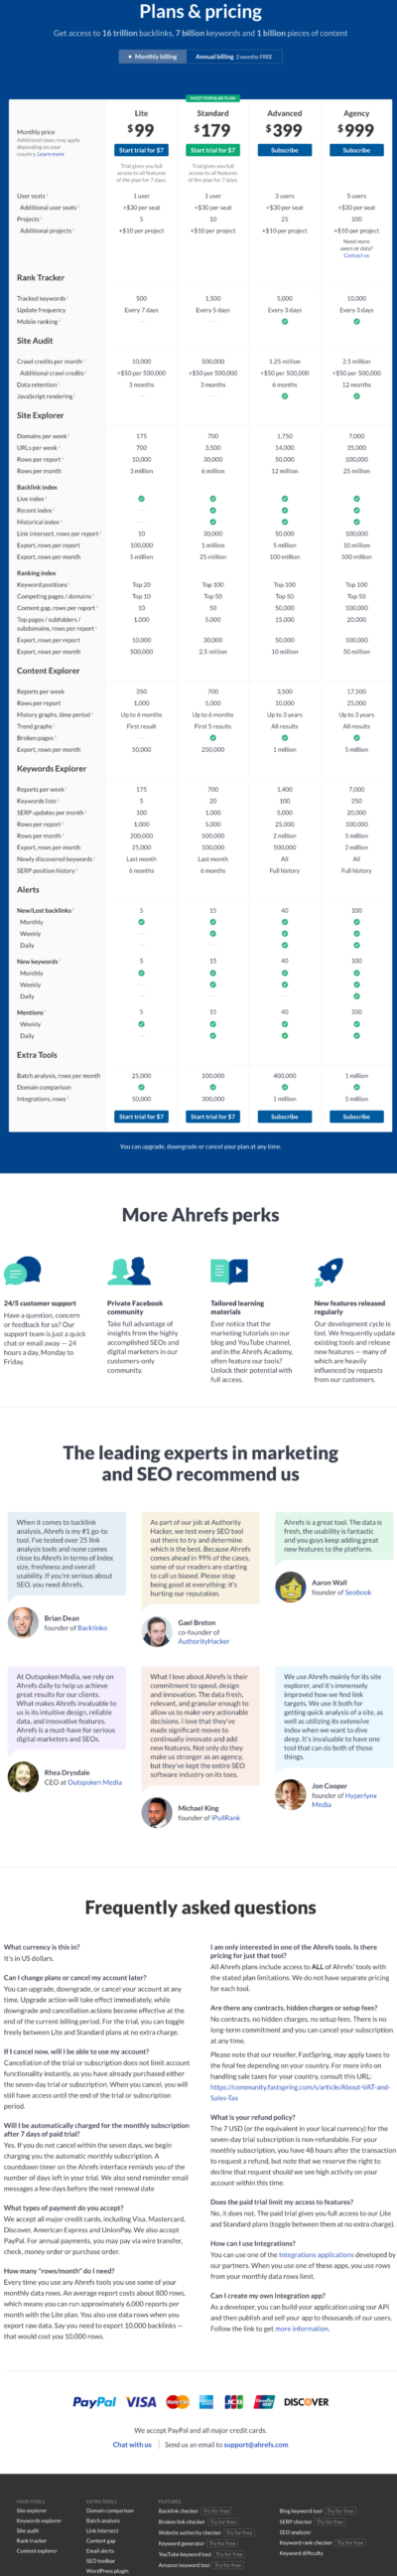 ahrefs pricing page screenshot